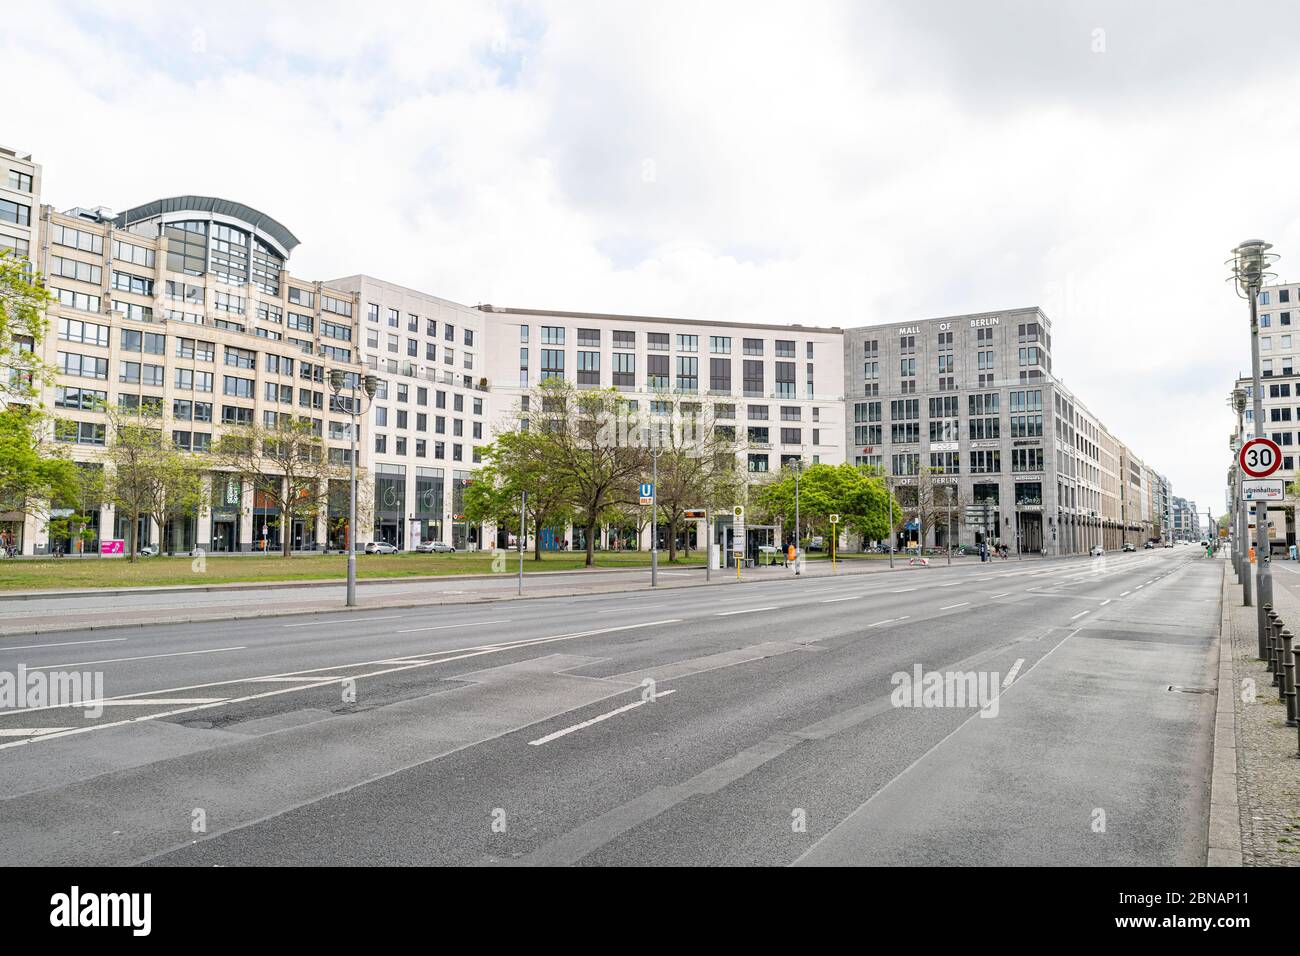 Leipziger Platz is one of the main shopping areas of Berlin featuring the Mall of Berlin, Germany Stock Photo